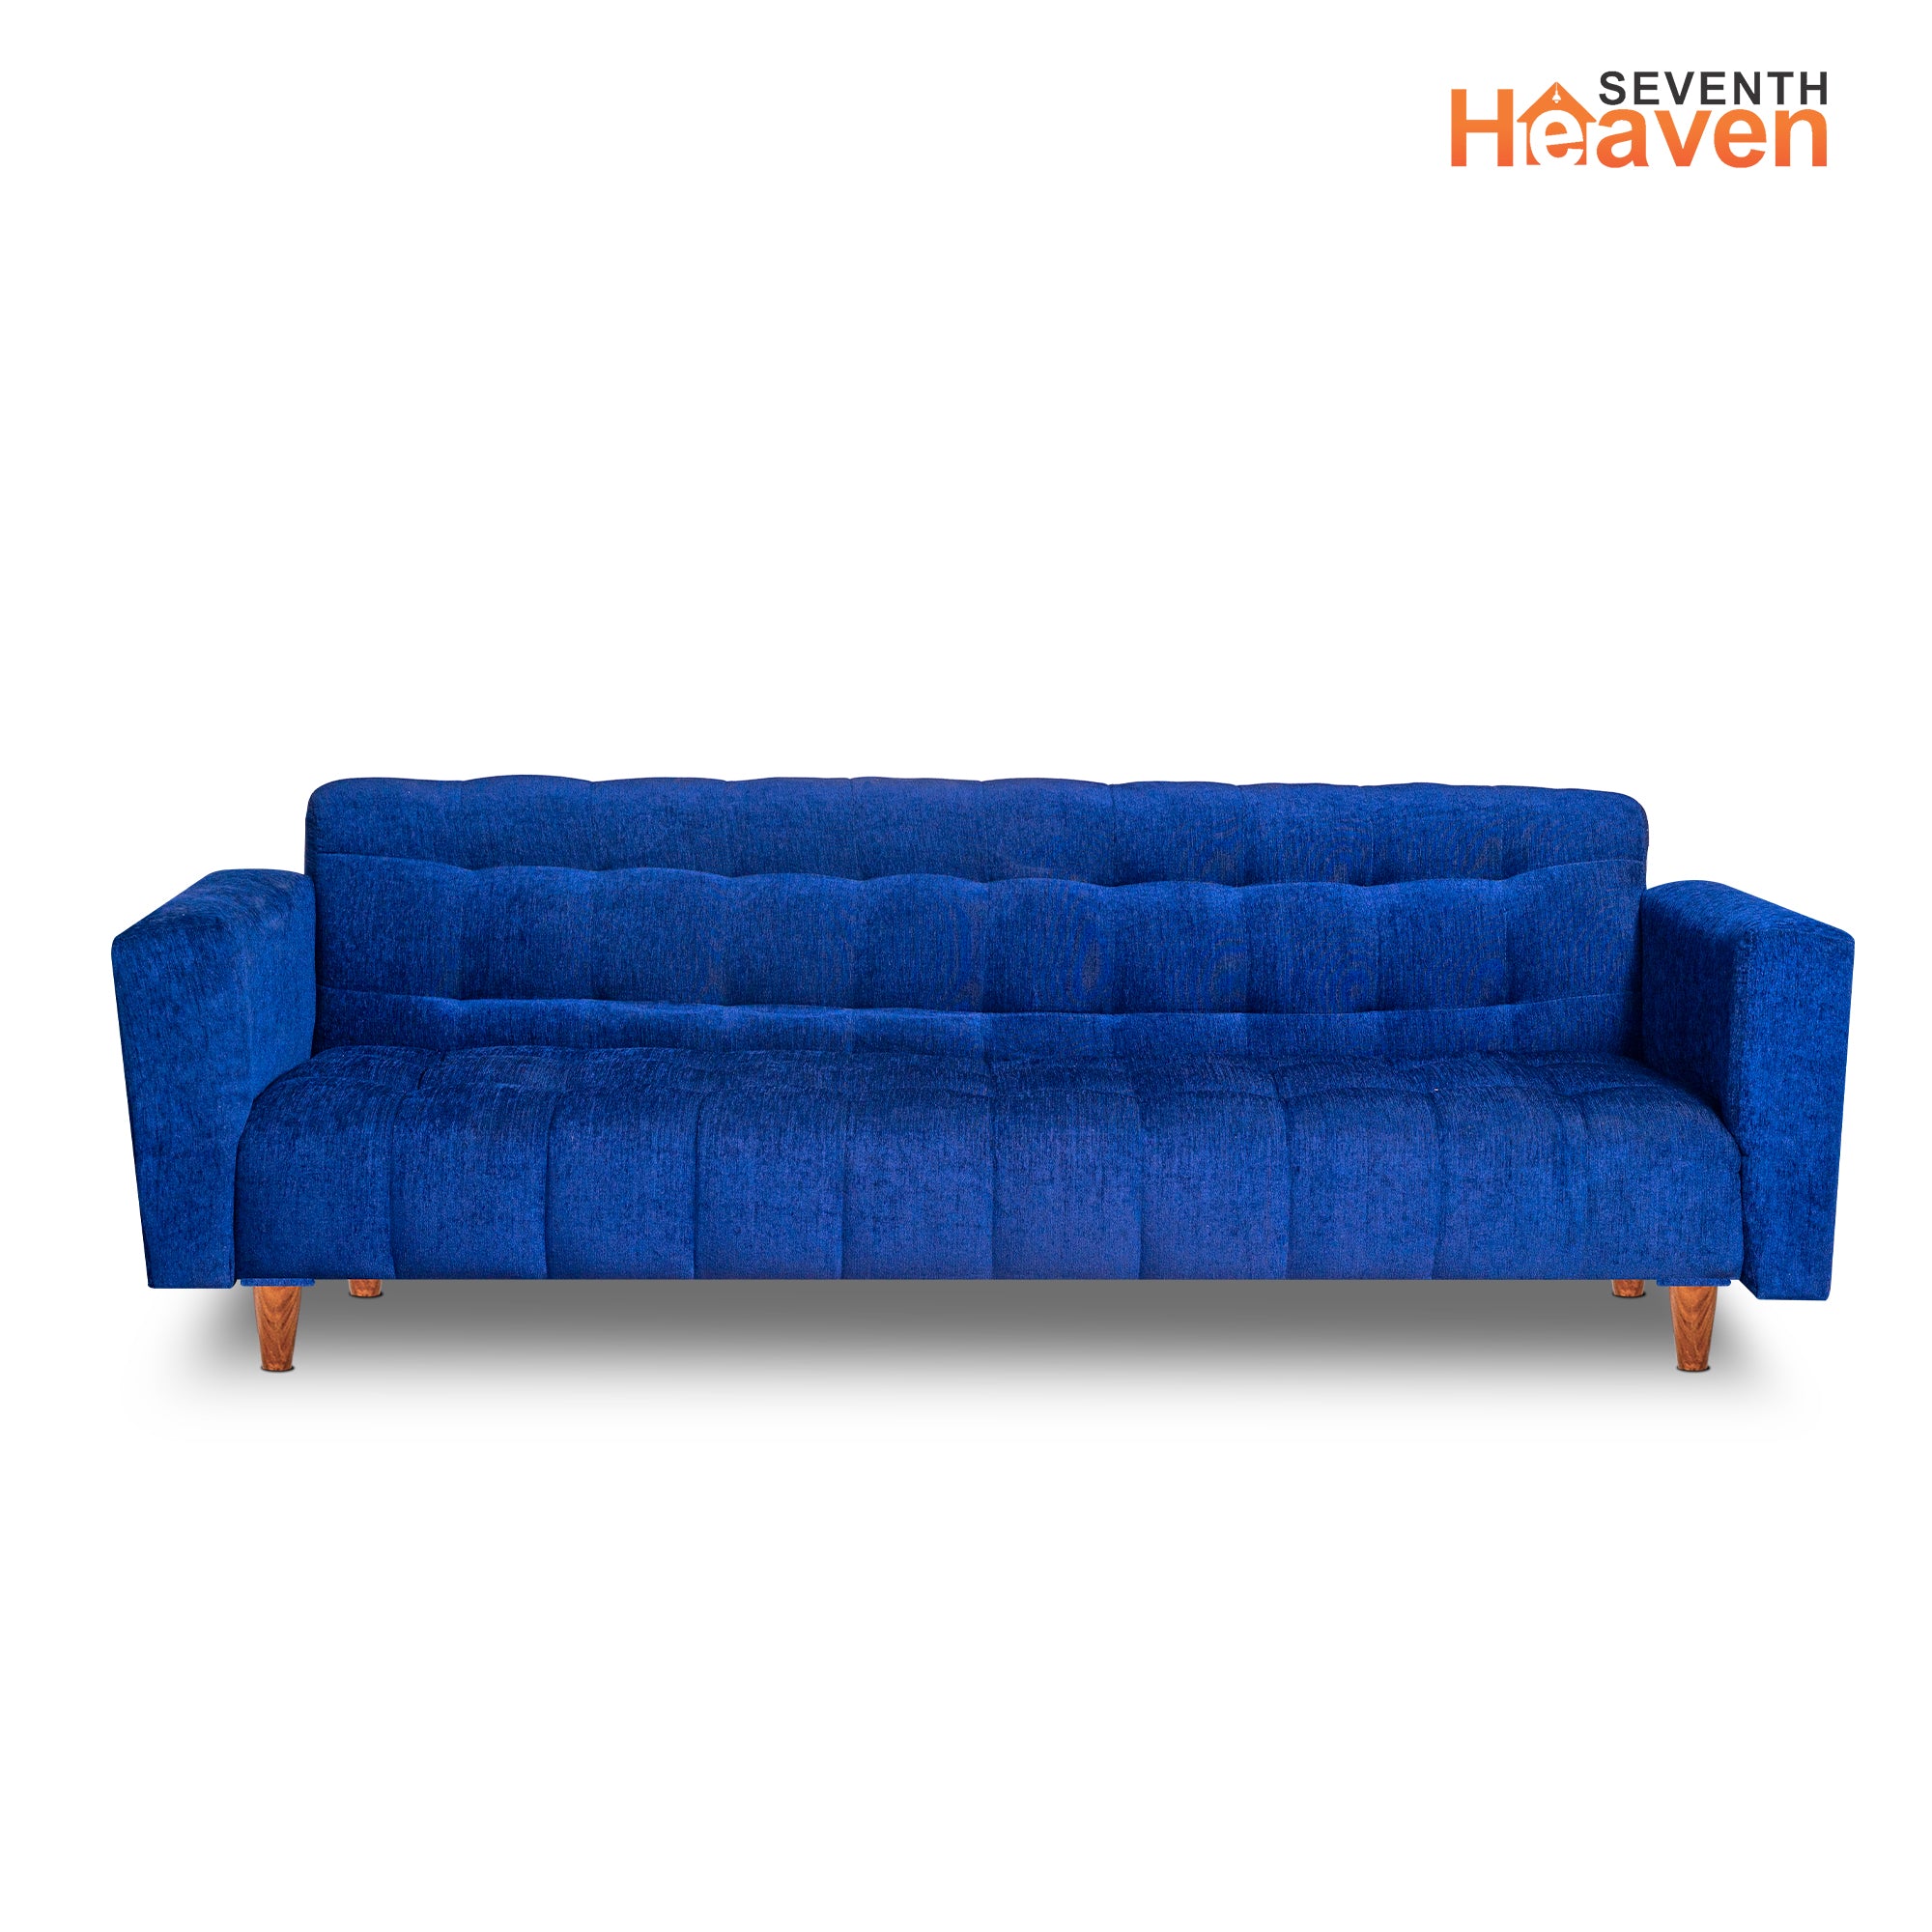 Seventh Heaven 4 Seater Wooden Sofa cum Bed, Chenille Molfino Fabric 72x36x16: 3 Year Warranty 4 Seater Single Solid Wood Pull Out Sofa Cum Bed  (Finish Color - Blue Delivery Condition - DIY(Do-It-Yourself))